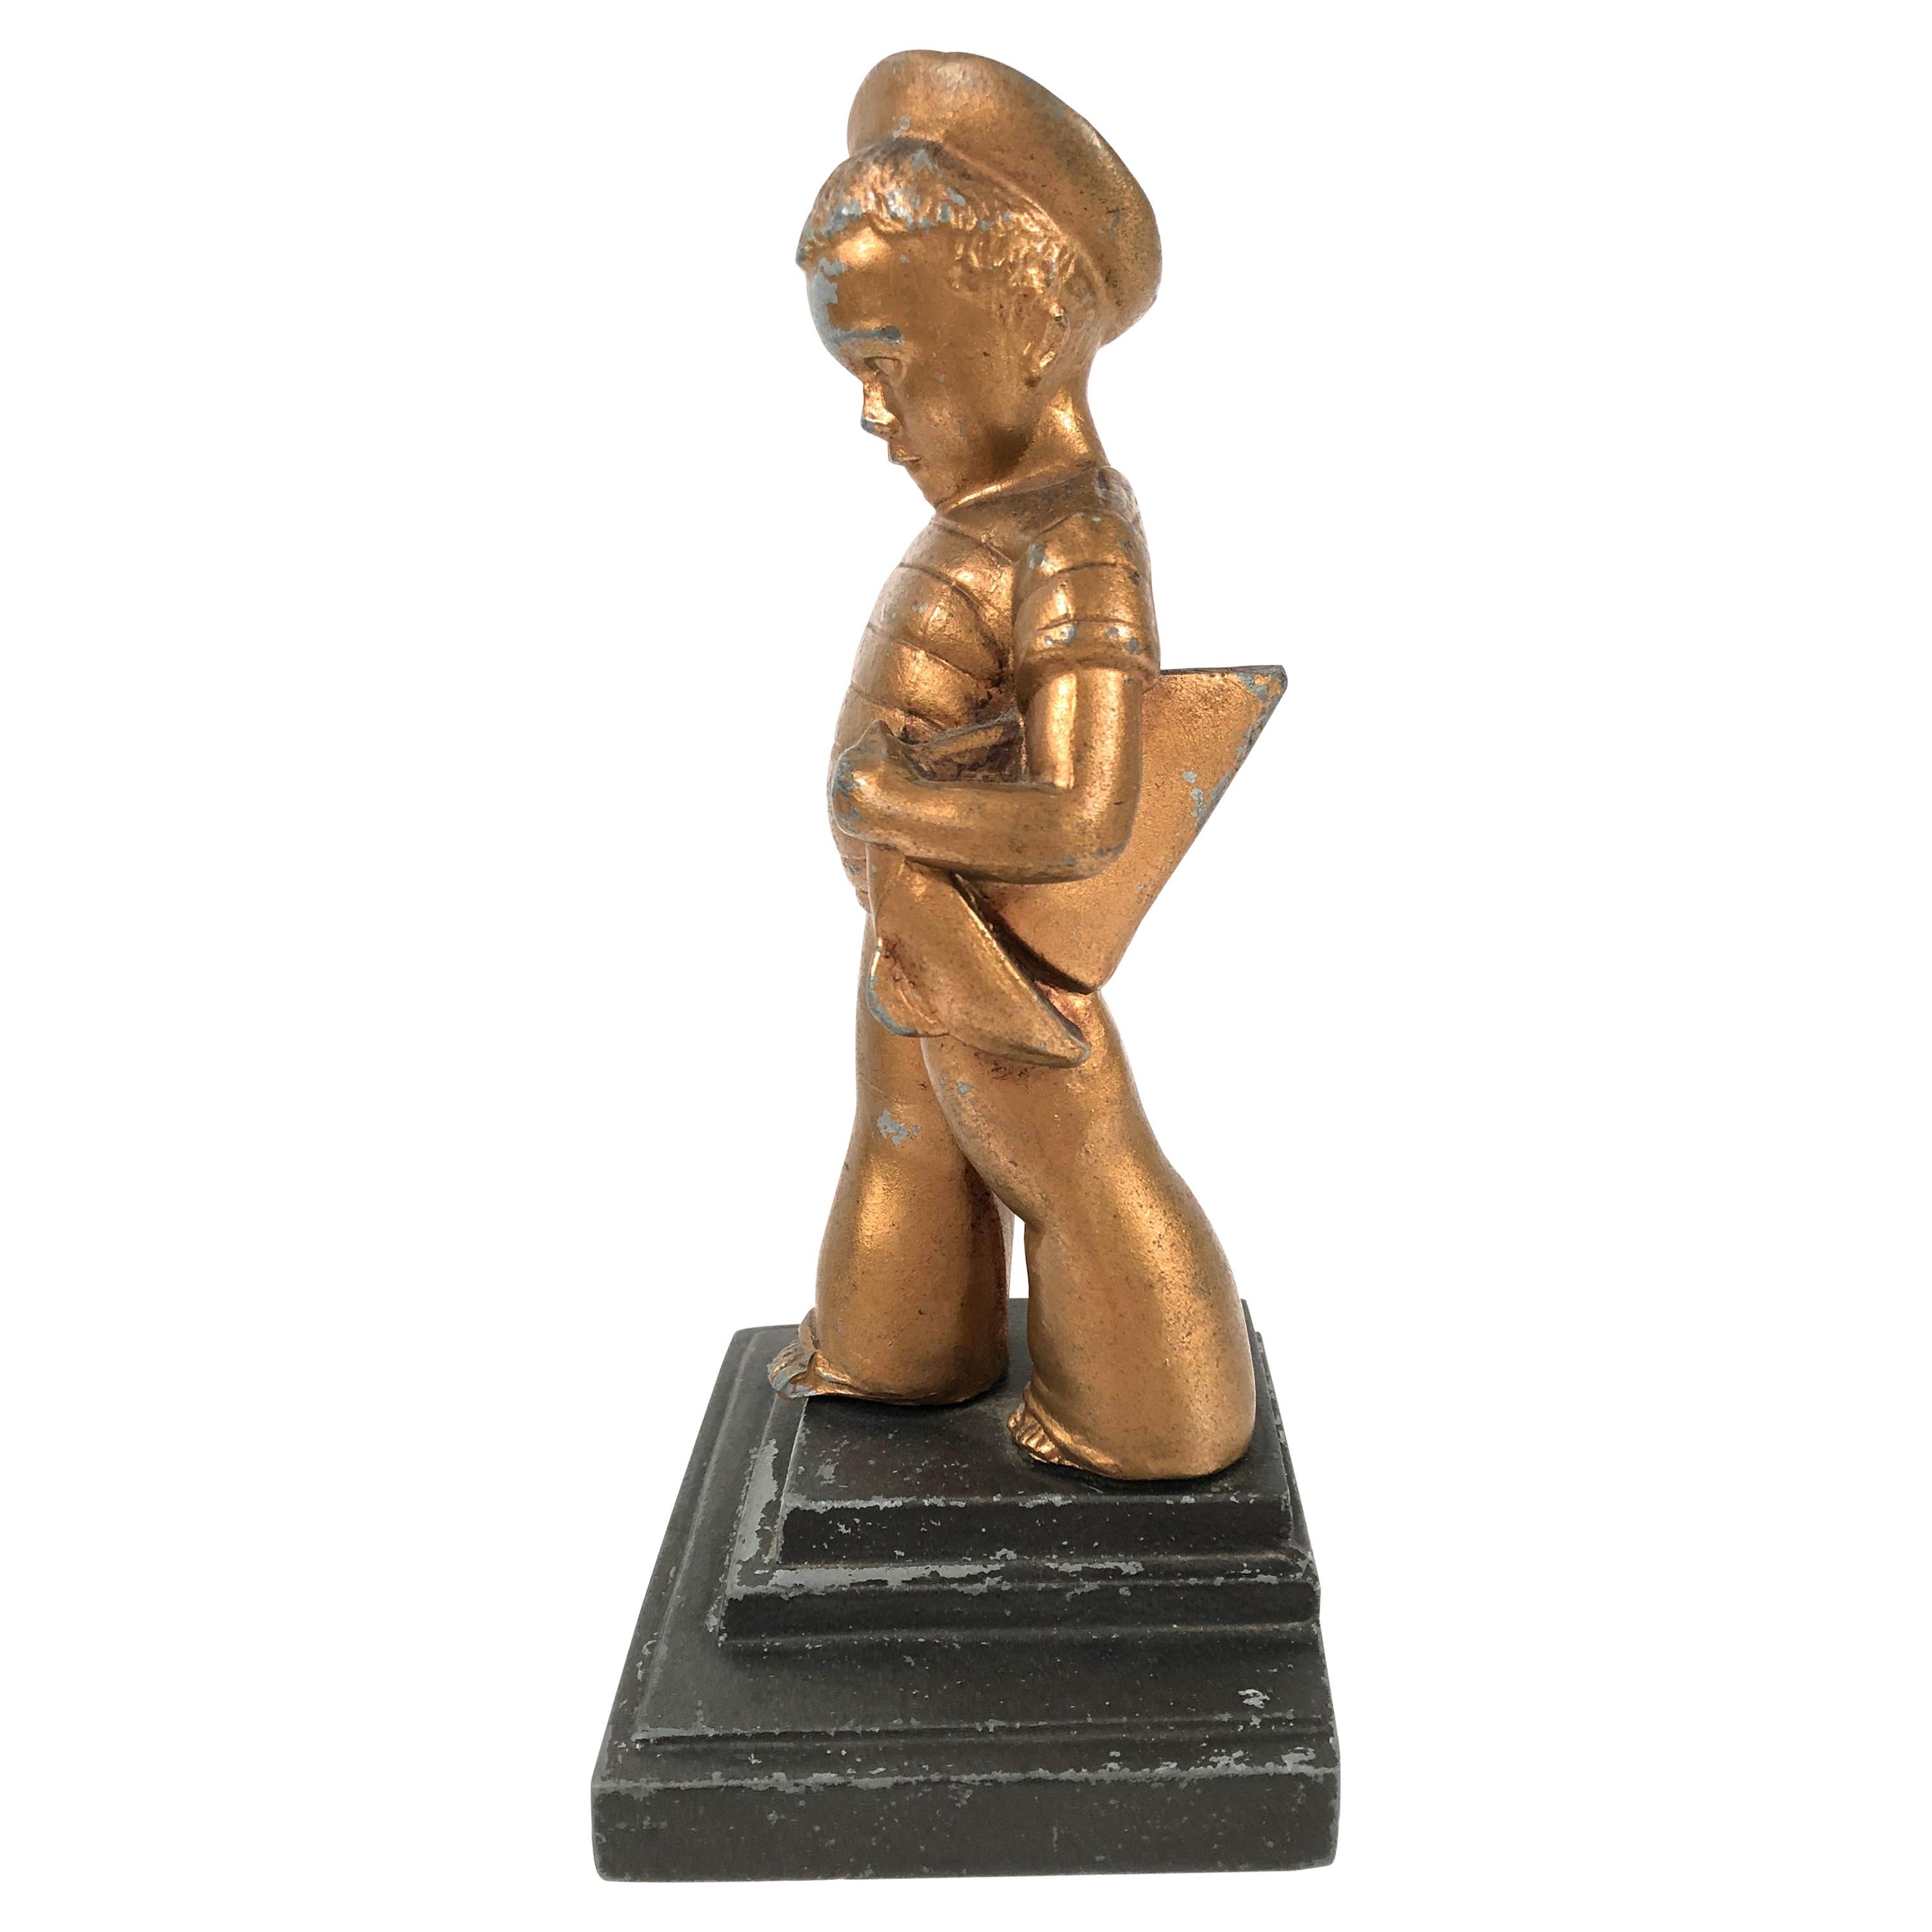 Art Deco Boy with Sailboat Bookend Sculpture